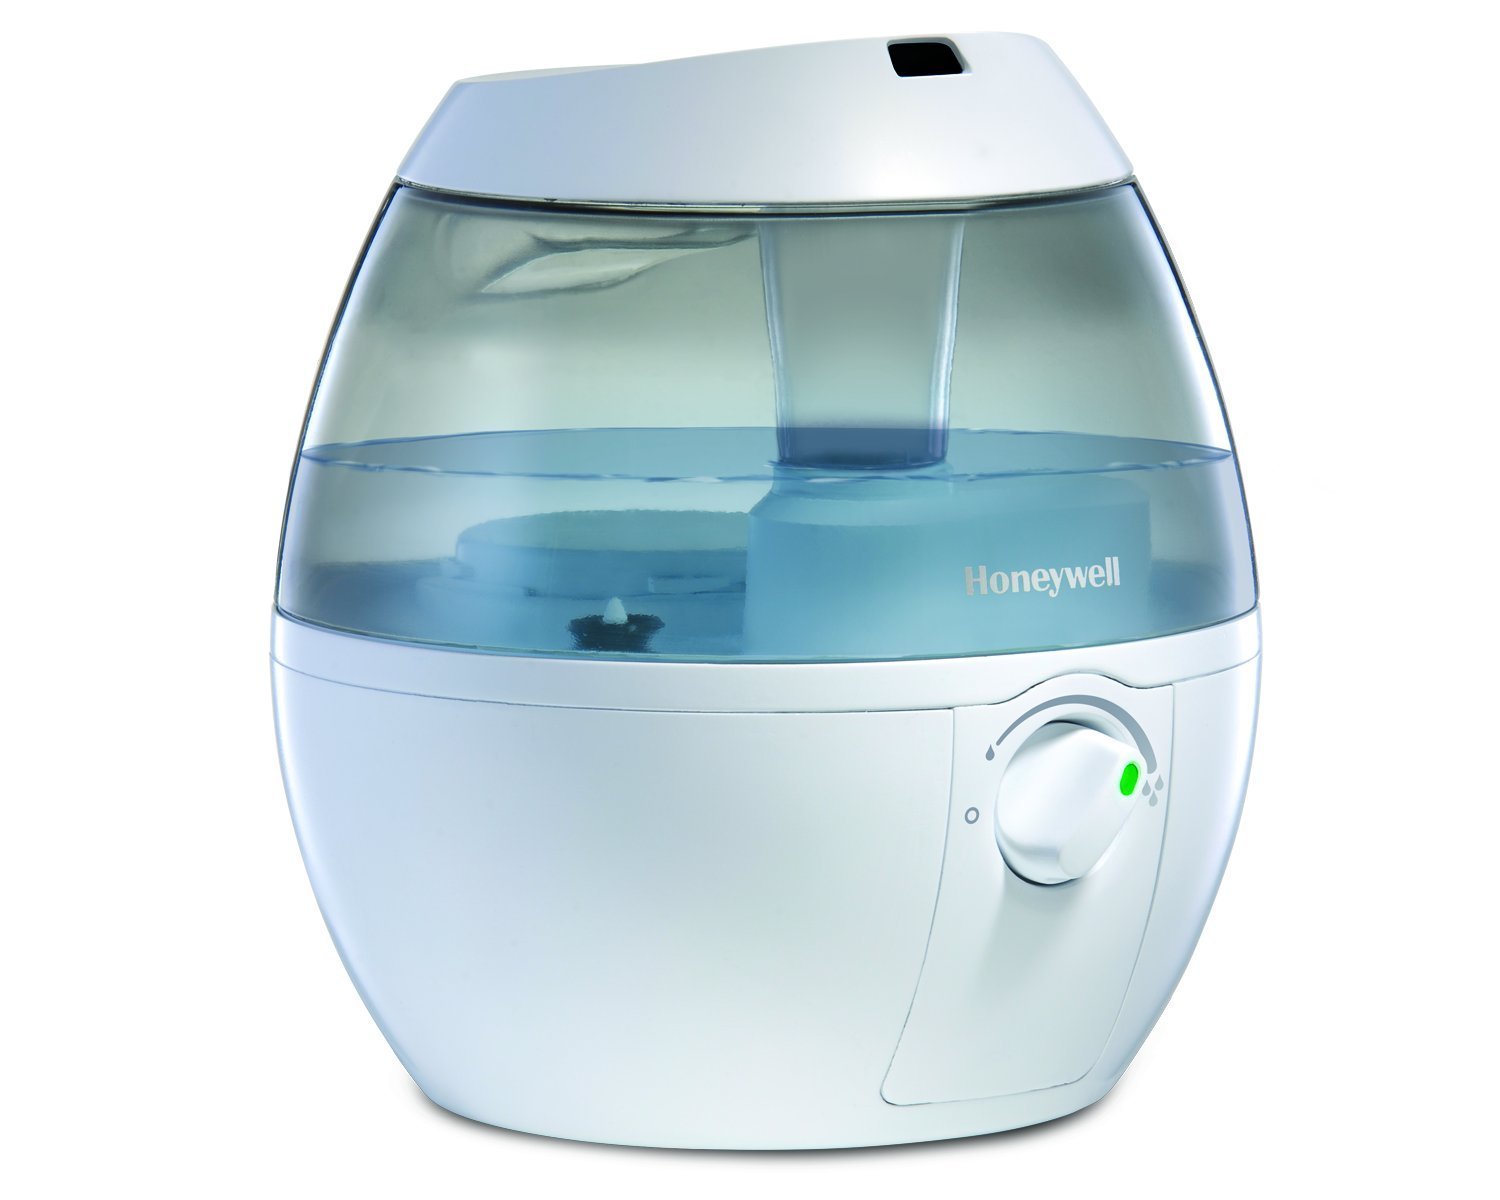 Highly Rated Honeywell Mistmate Cool Mist Humidifier at LOW Price